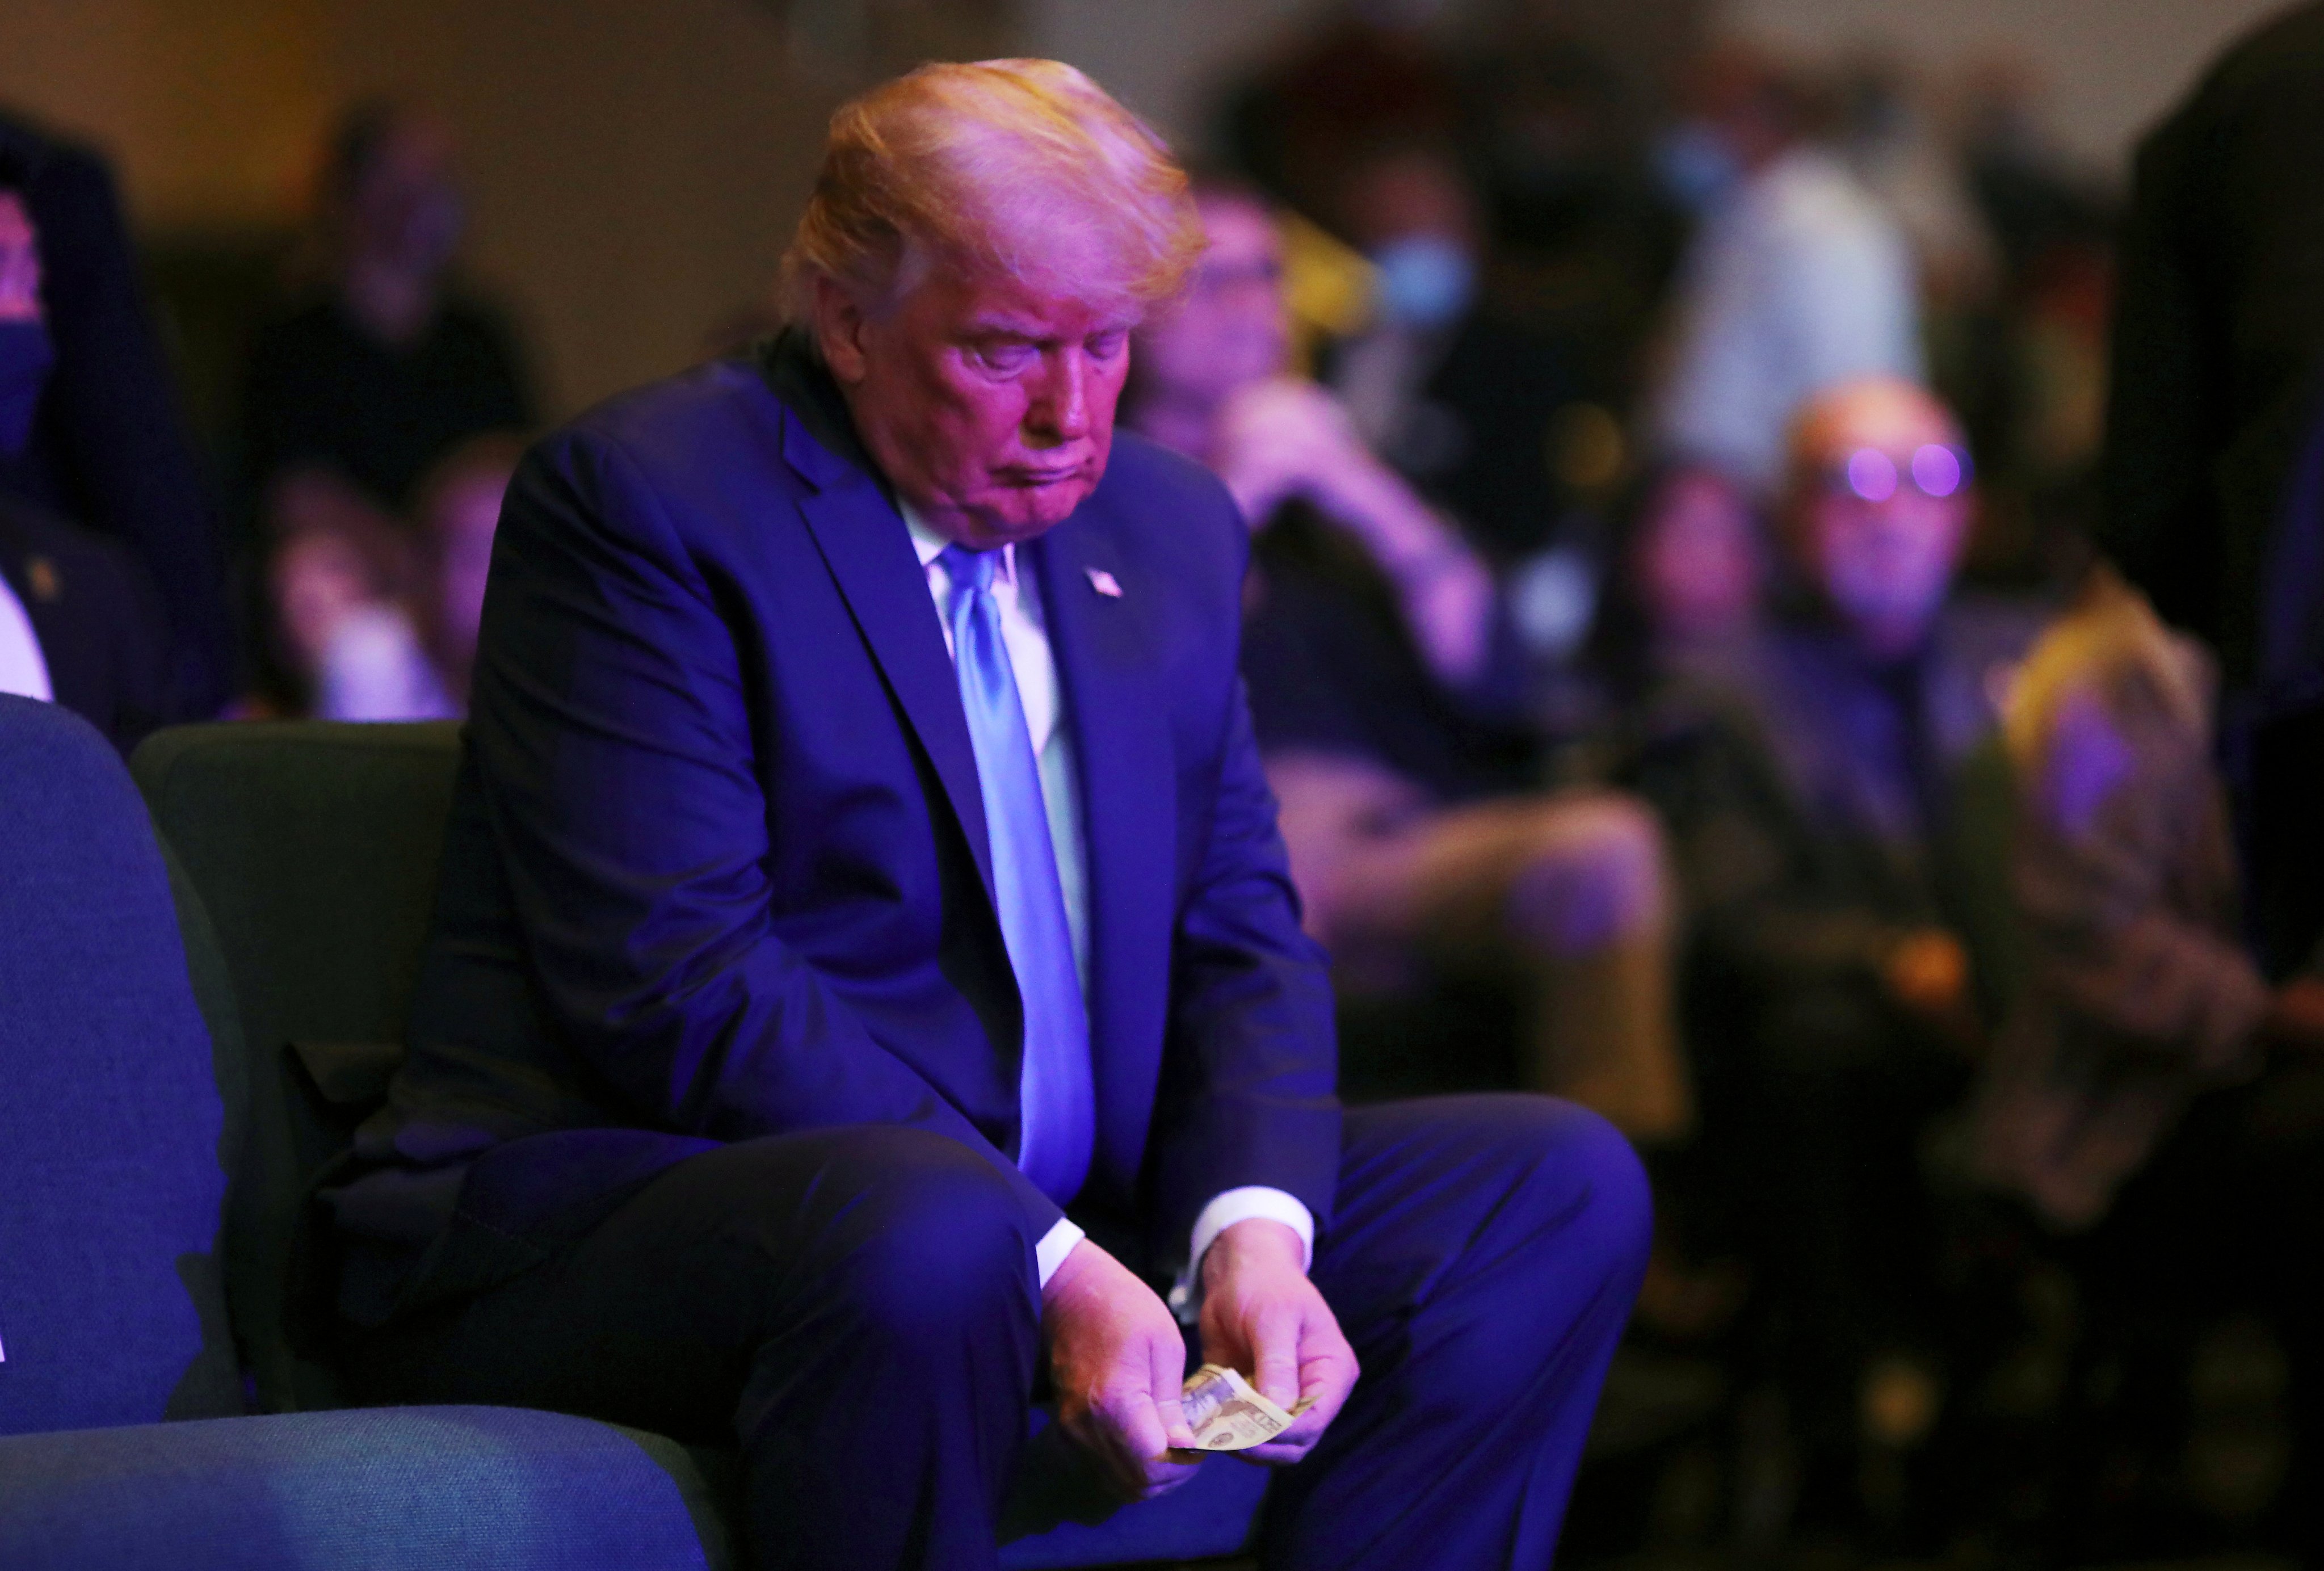 Trump counts money before donating to a church service in Las Vegas in 2020. He claims to have “almost” US$500 million in cash. Photo: Reuters